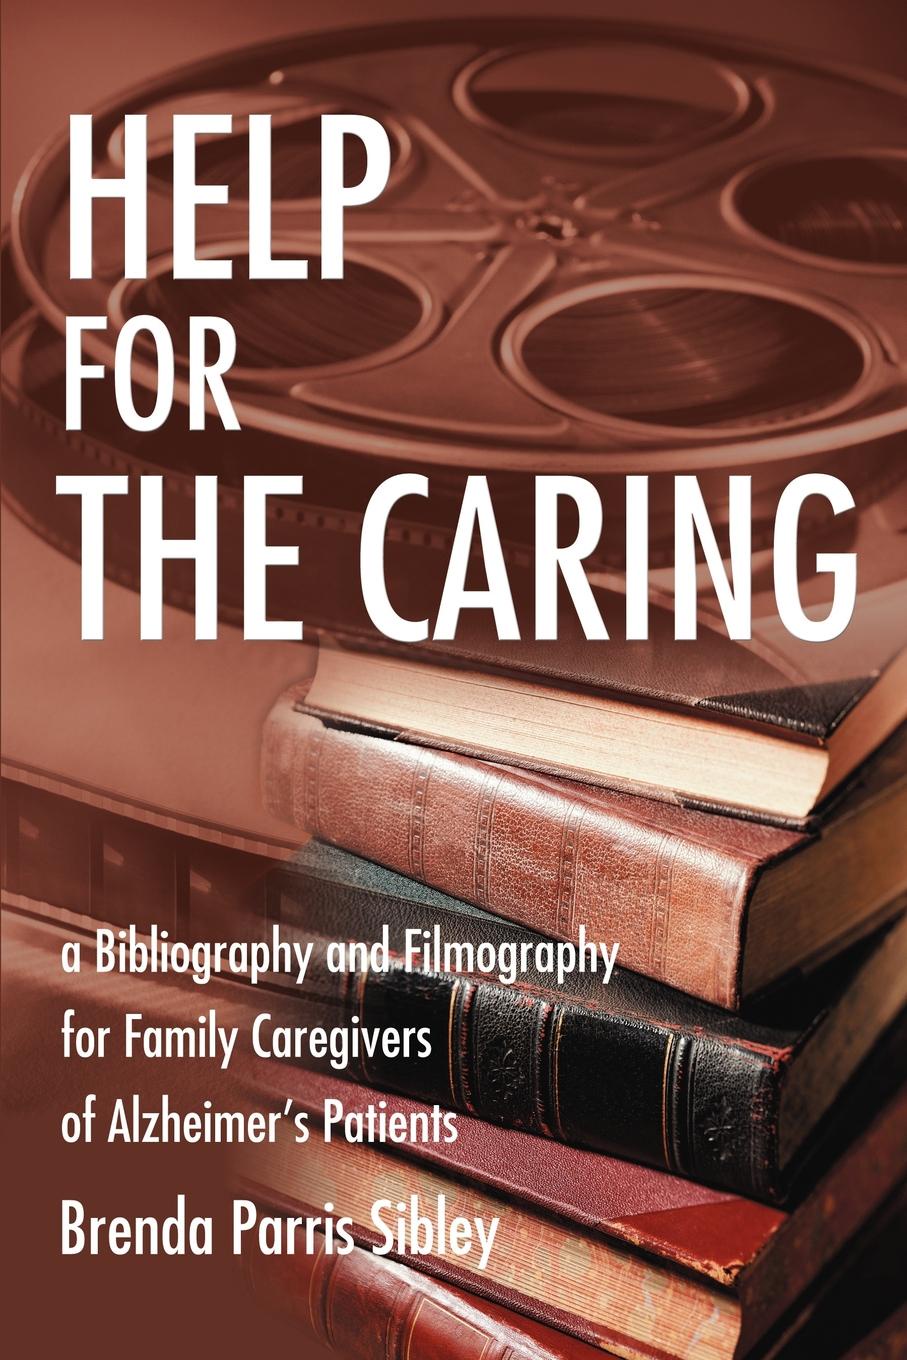 Help for the Caring. A Bibliography and Filmography for Family Caregivers of Alzheimer